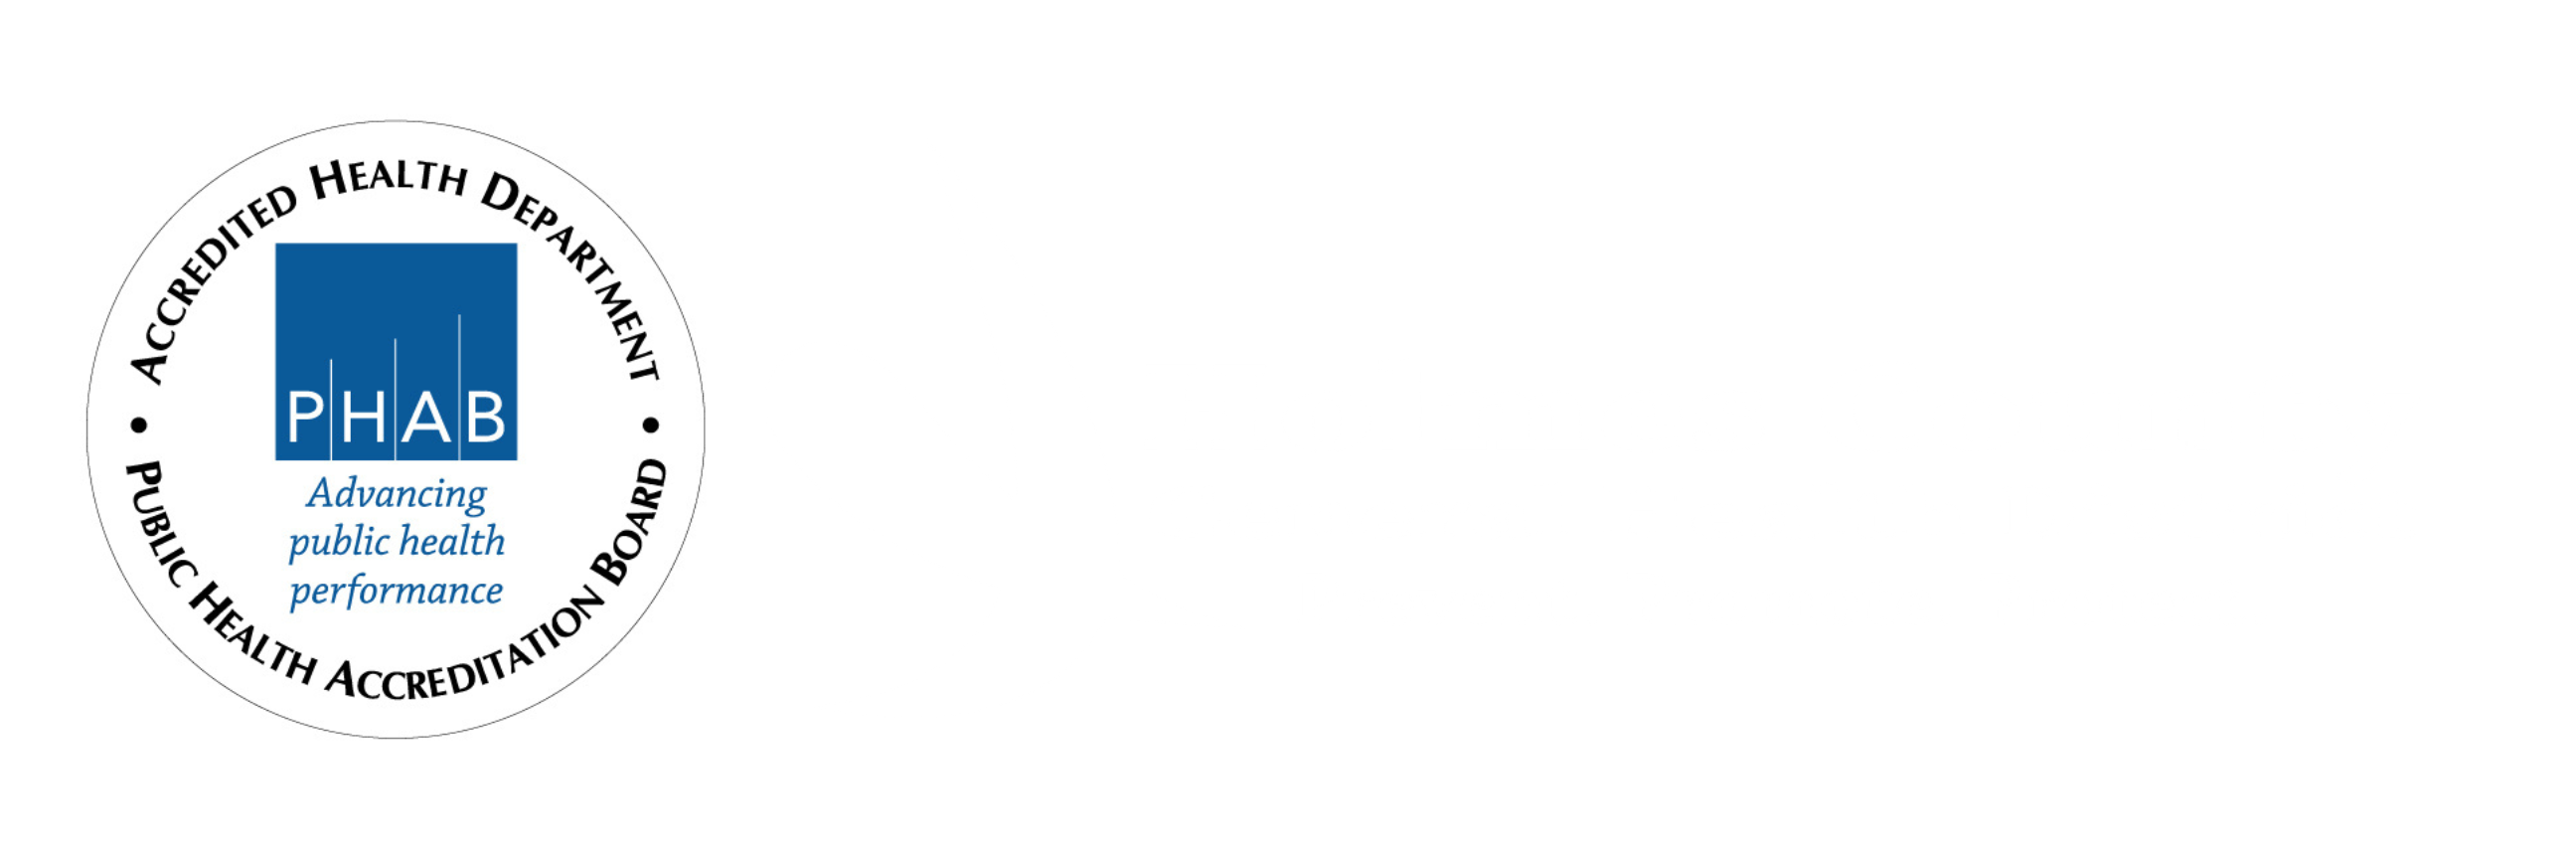 Holmes County General Health District